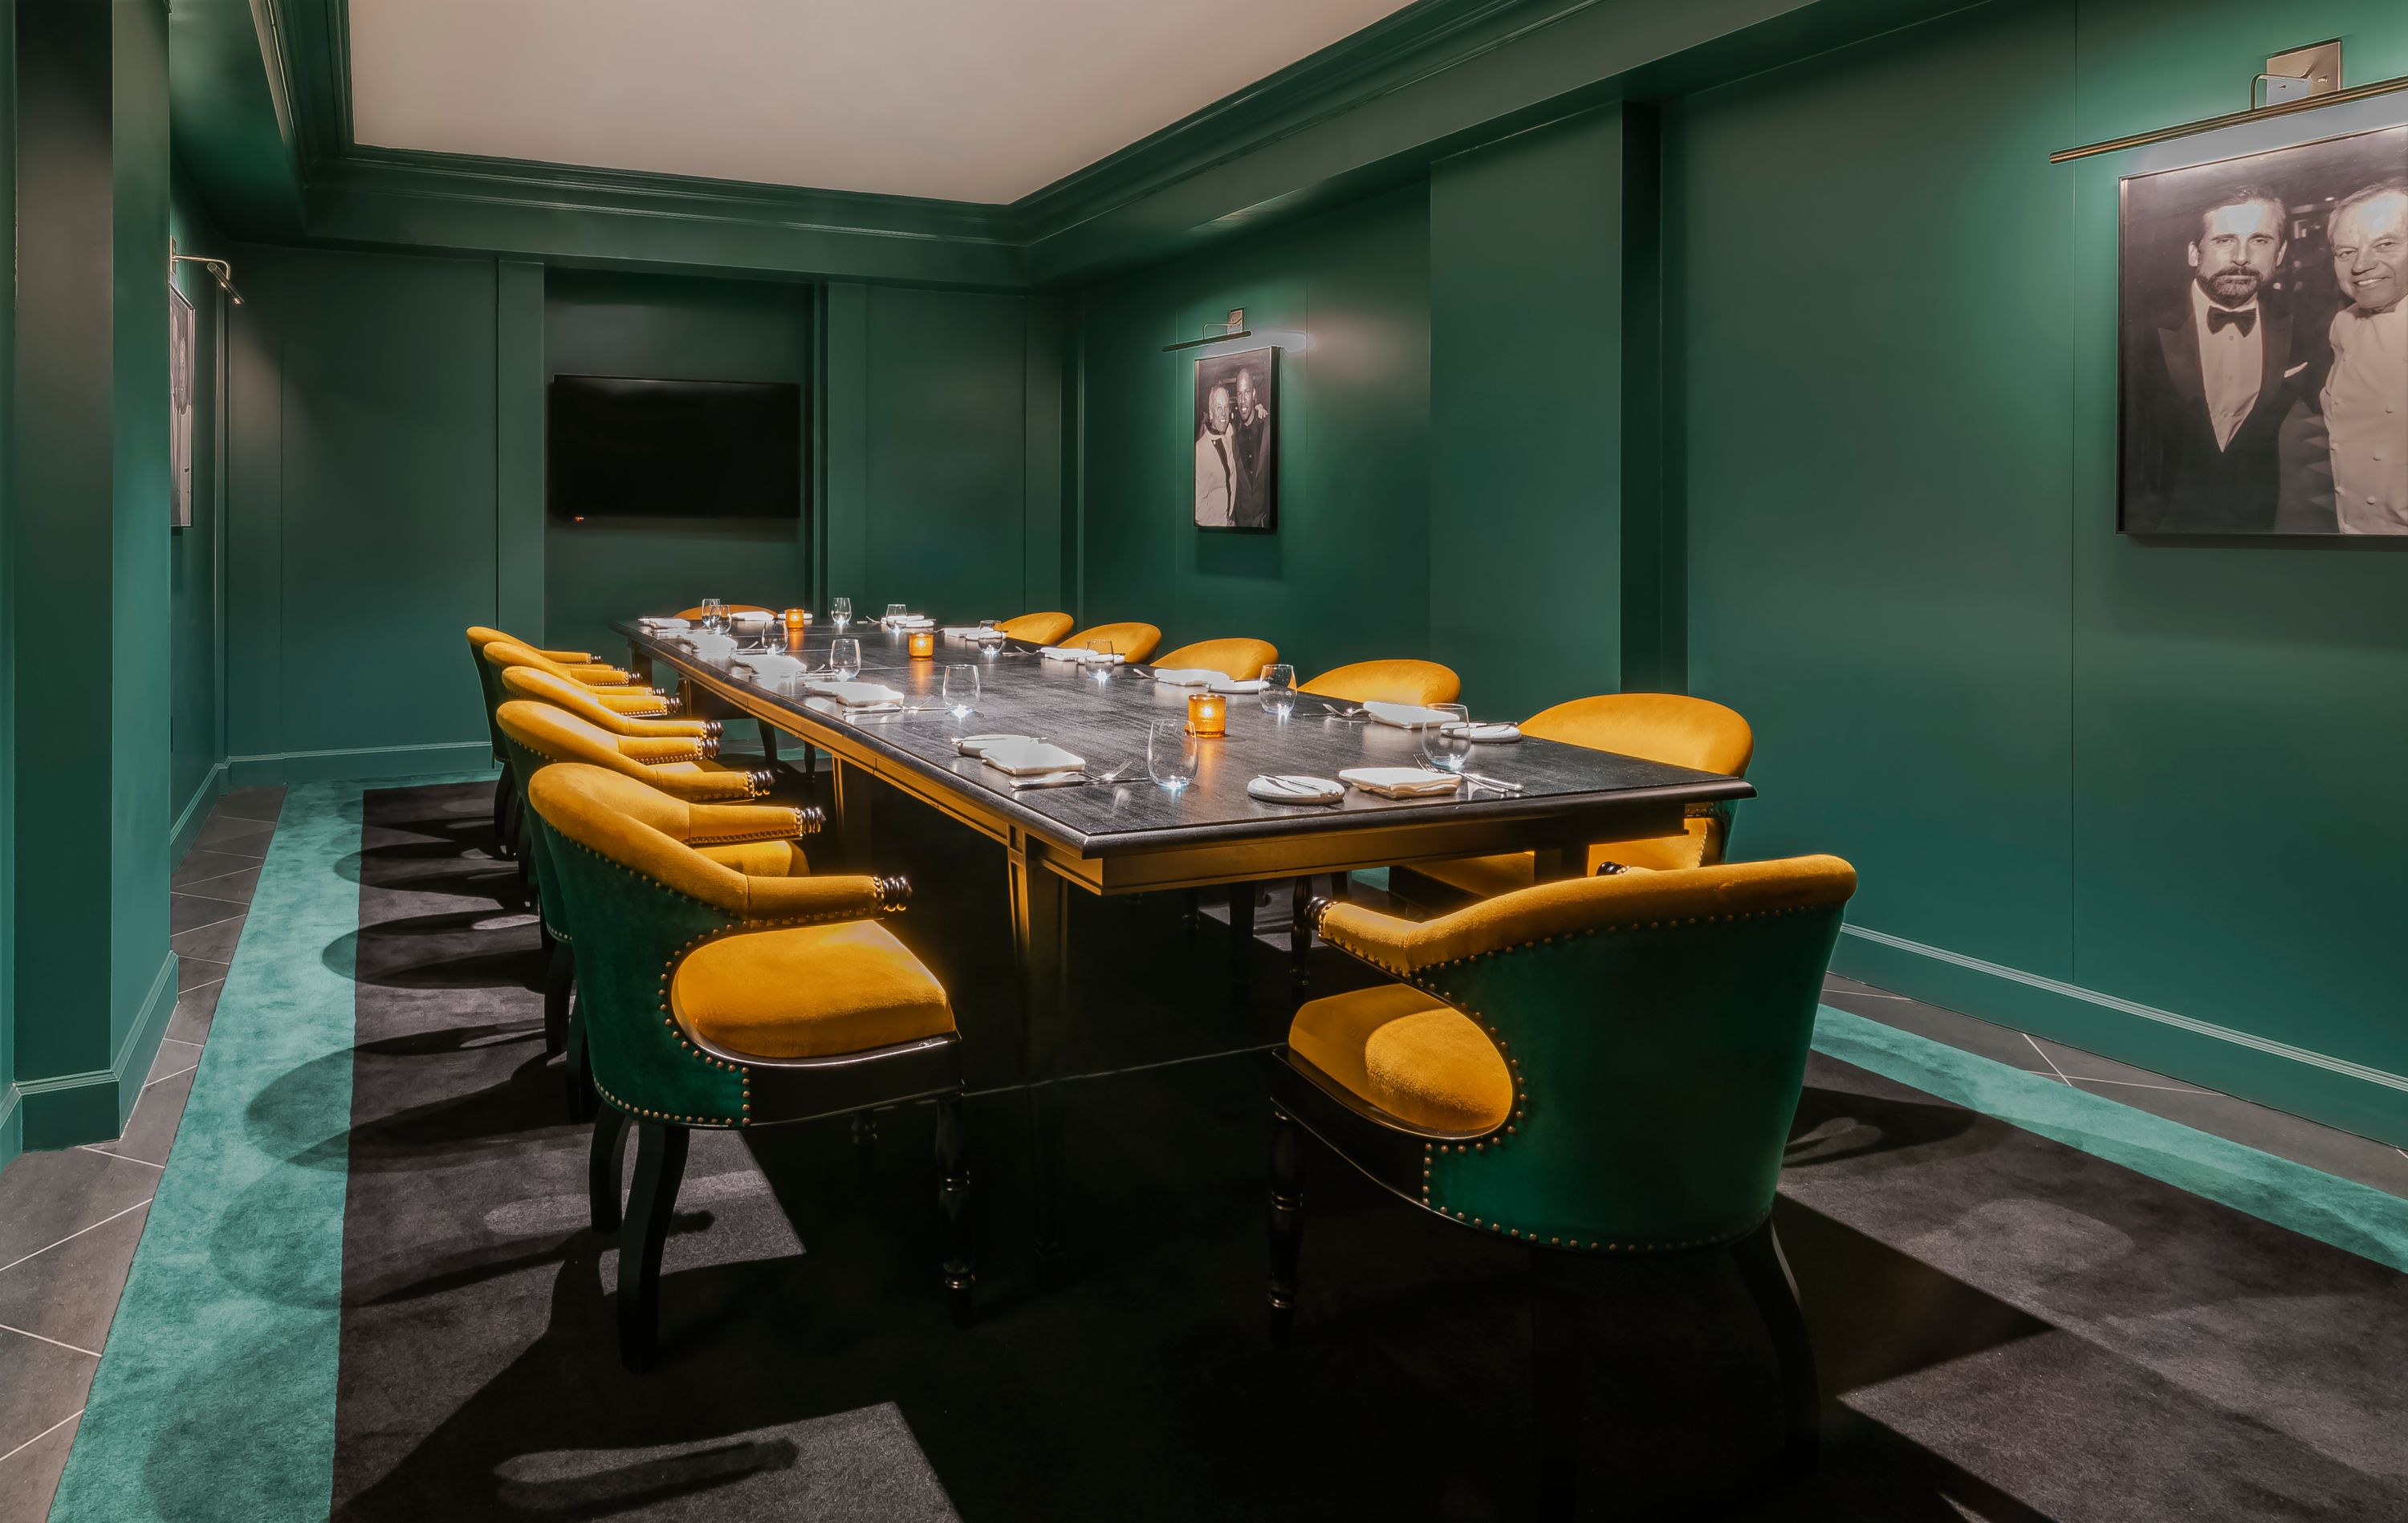 Private Dining Room | Rosewood Washington, D.C. Meeting Spaces & Facilities